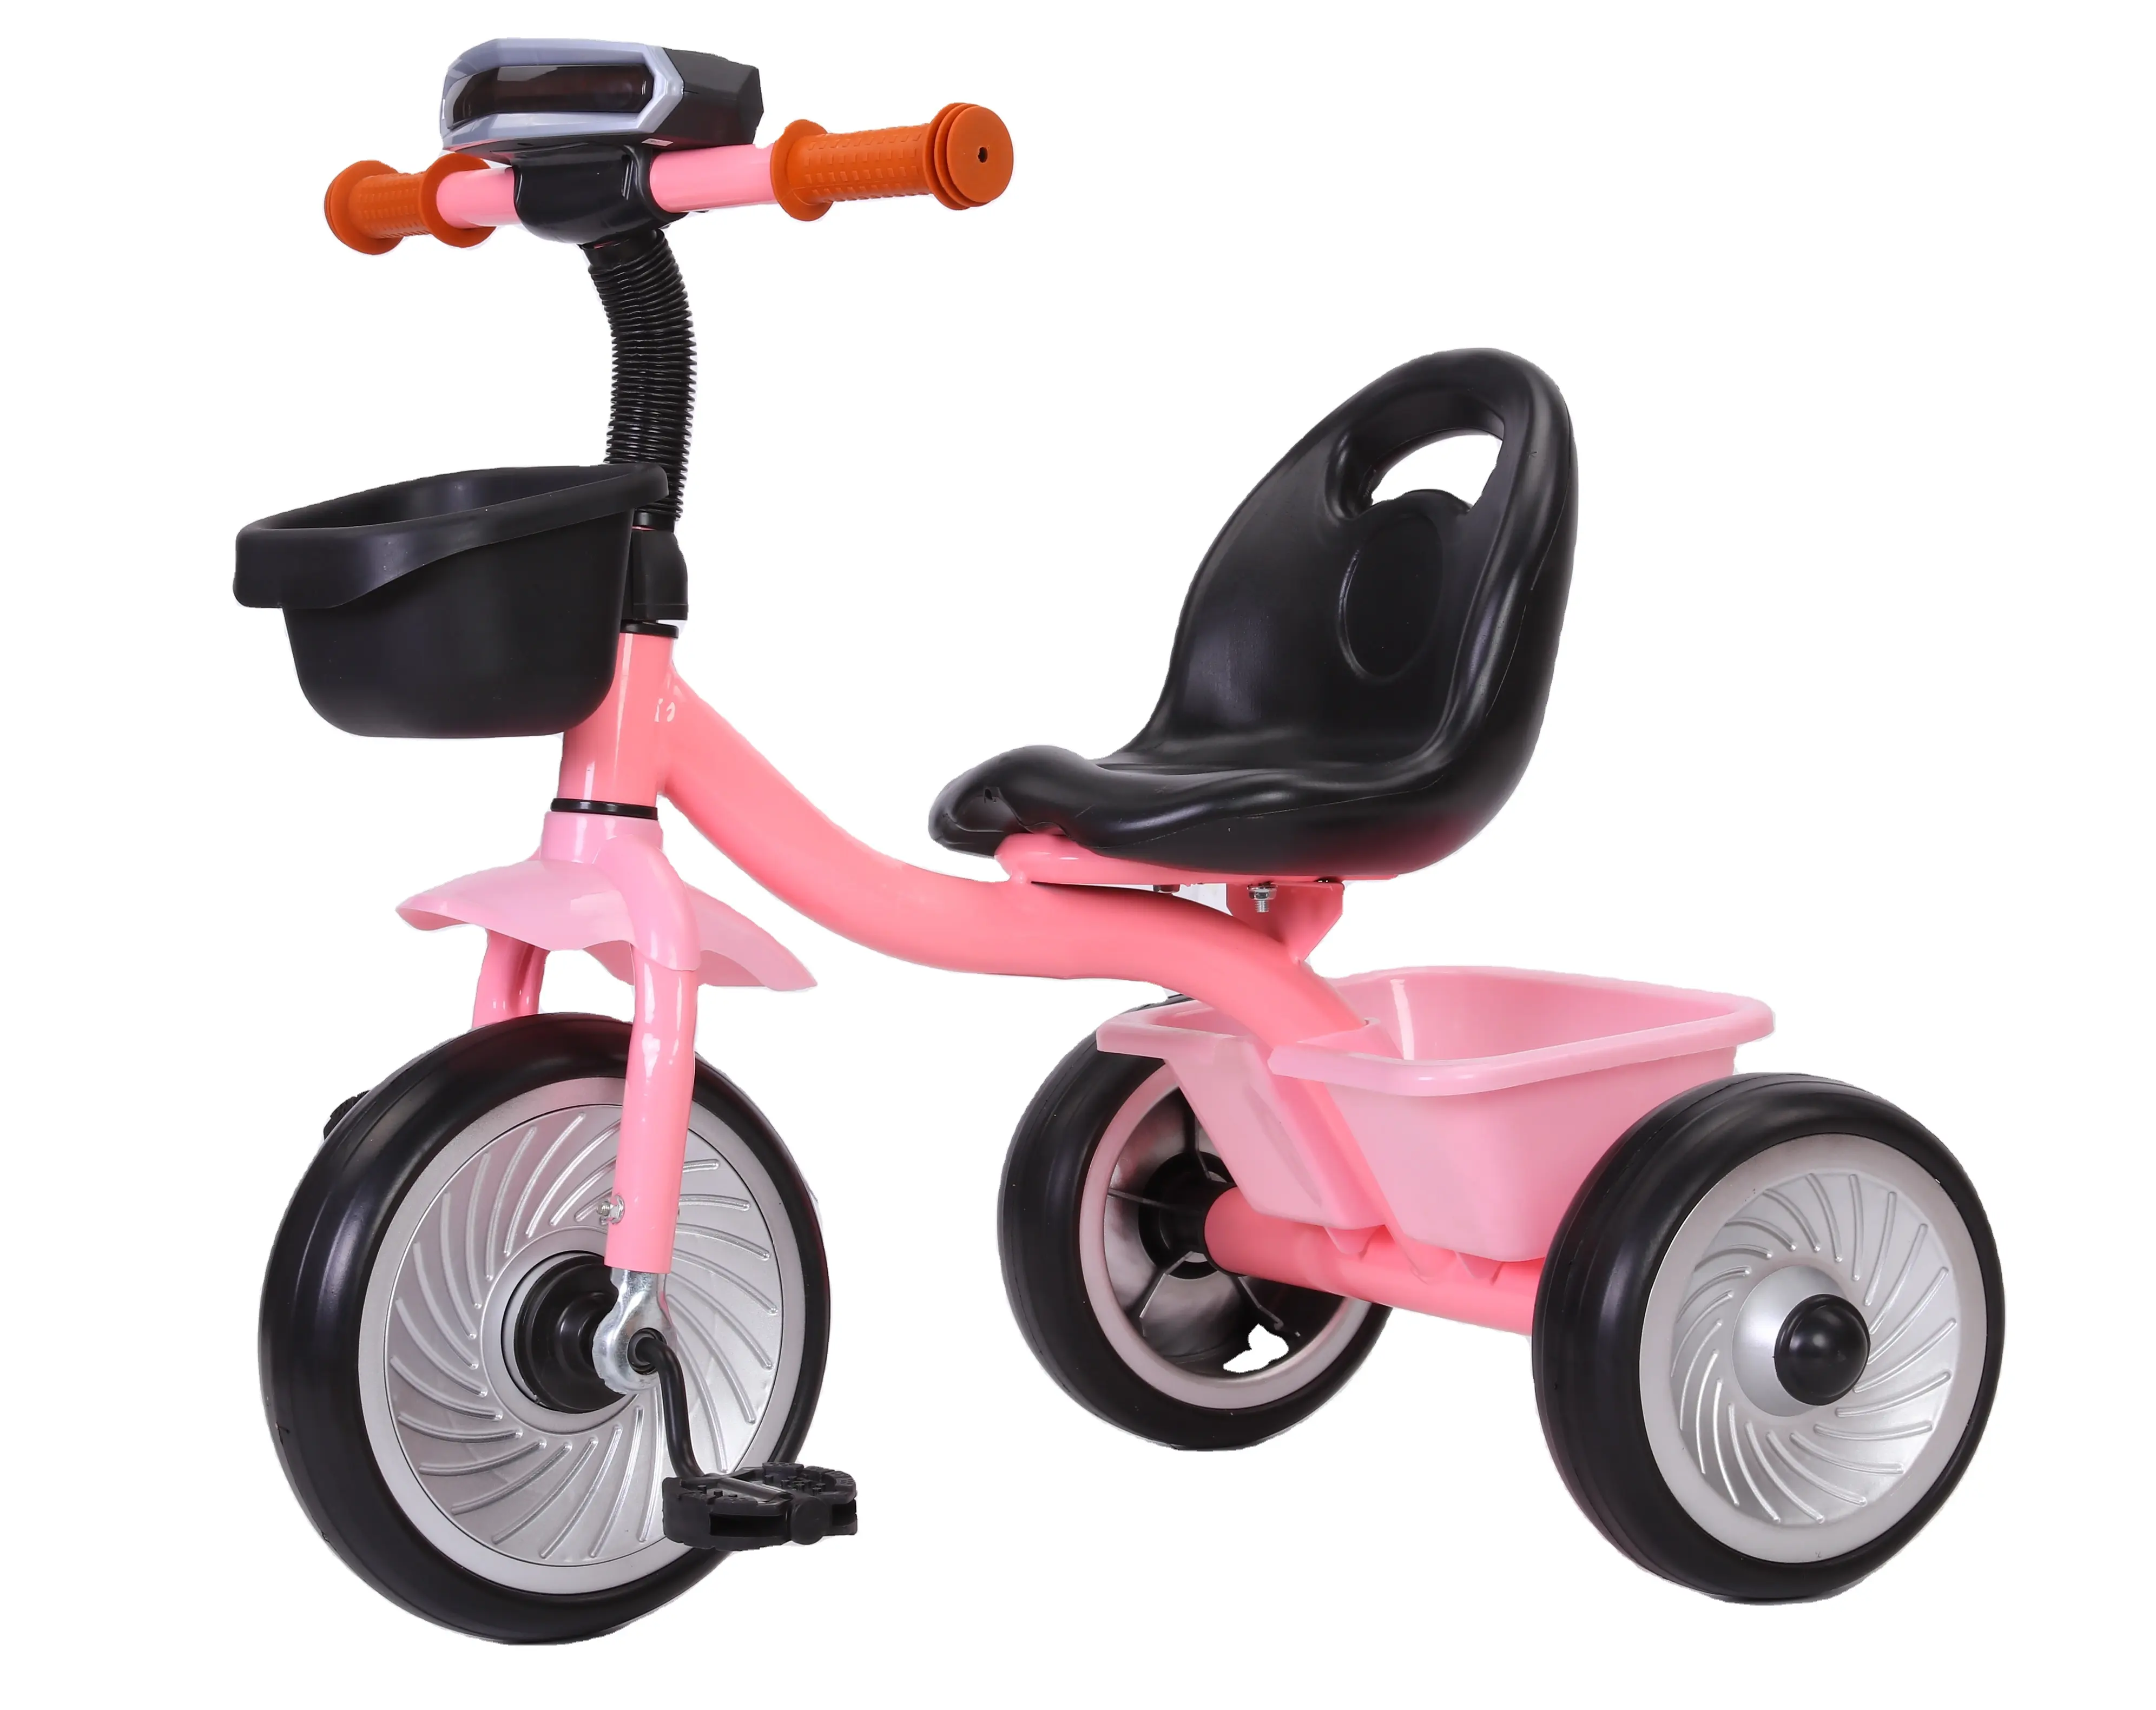 2022 cheap tricycle bike for kids with Push handle oem children other tricycles 4 in 1 baby to drive for cargo kids toy tricycle